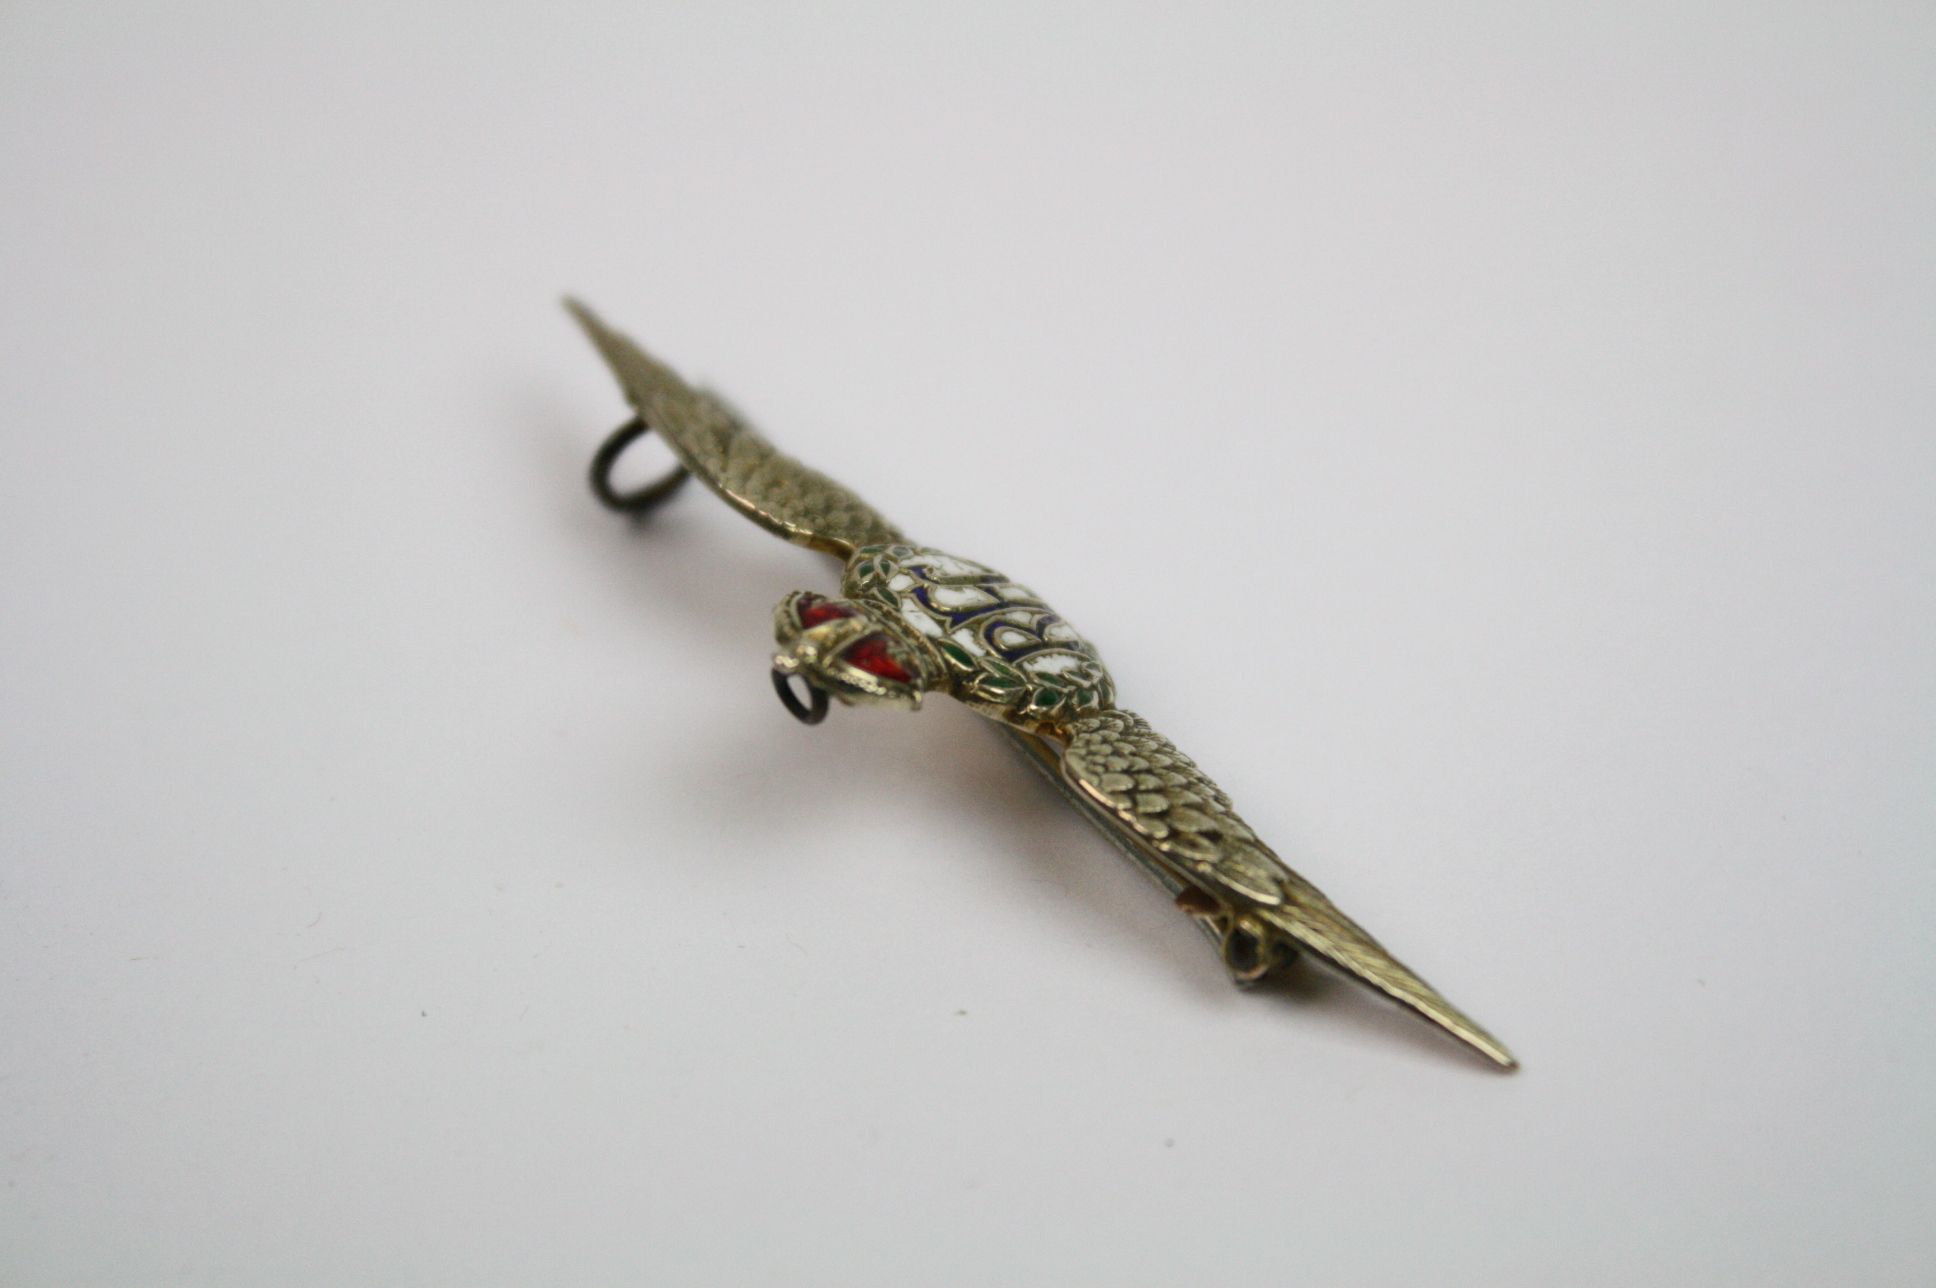 A 9ct Gold And Enamel Royal Flying Corps / RFC Wings Sweetheart Brooch, Marked 9ct For 9ct Gold To - Image 6 of 7